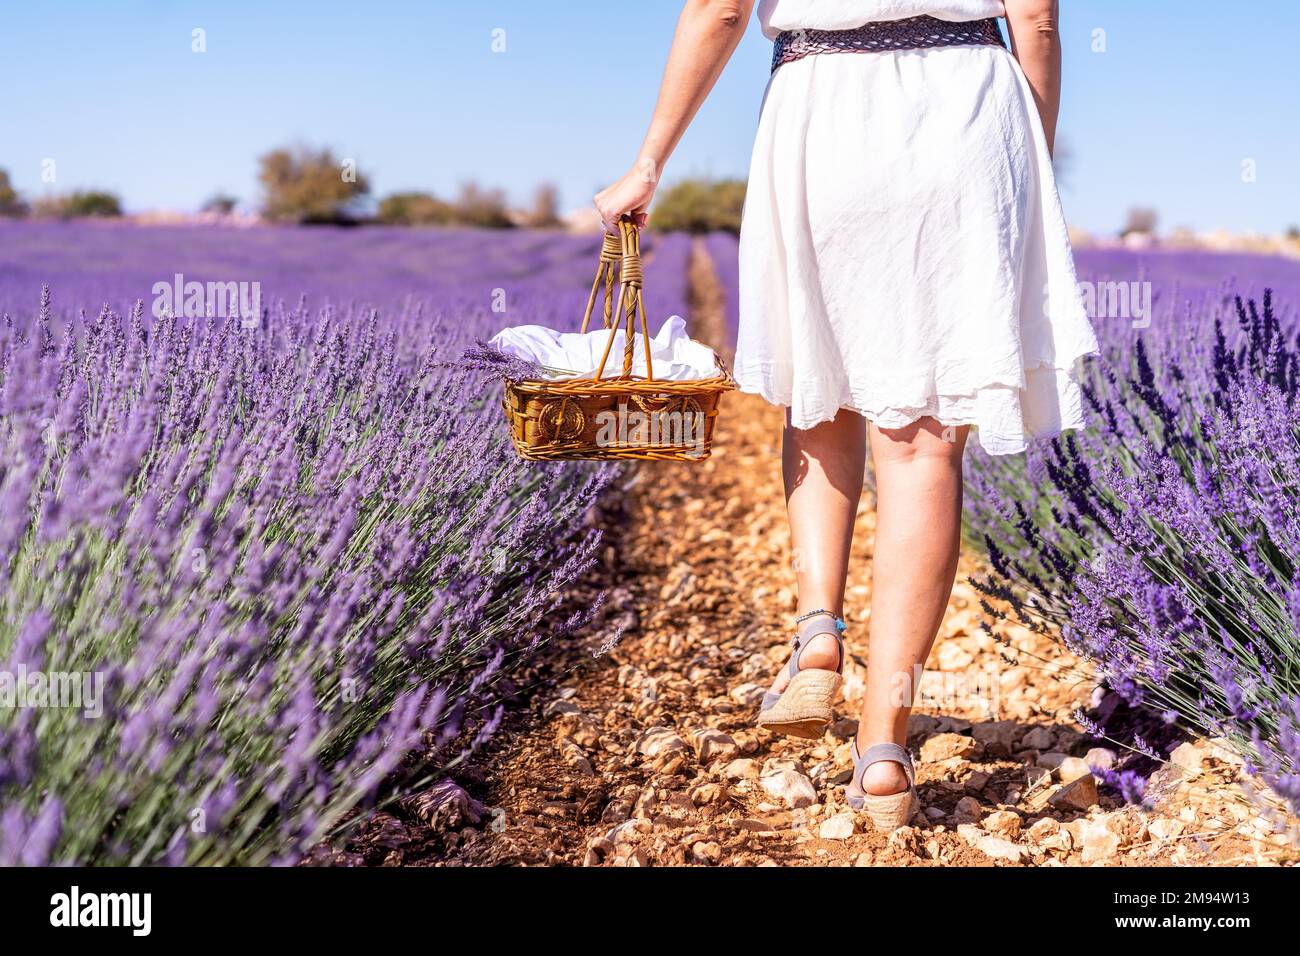 Lifestyle, a woman in a summer lavender field picking flowers in a white dress Stock Photo